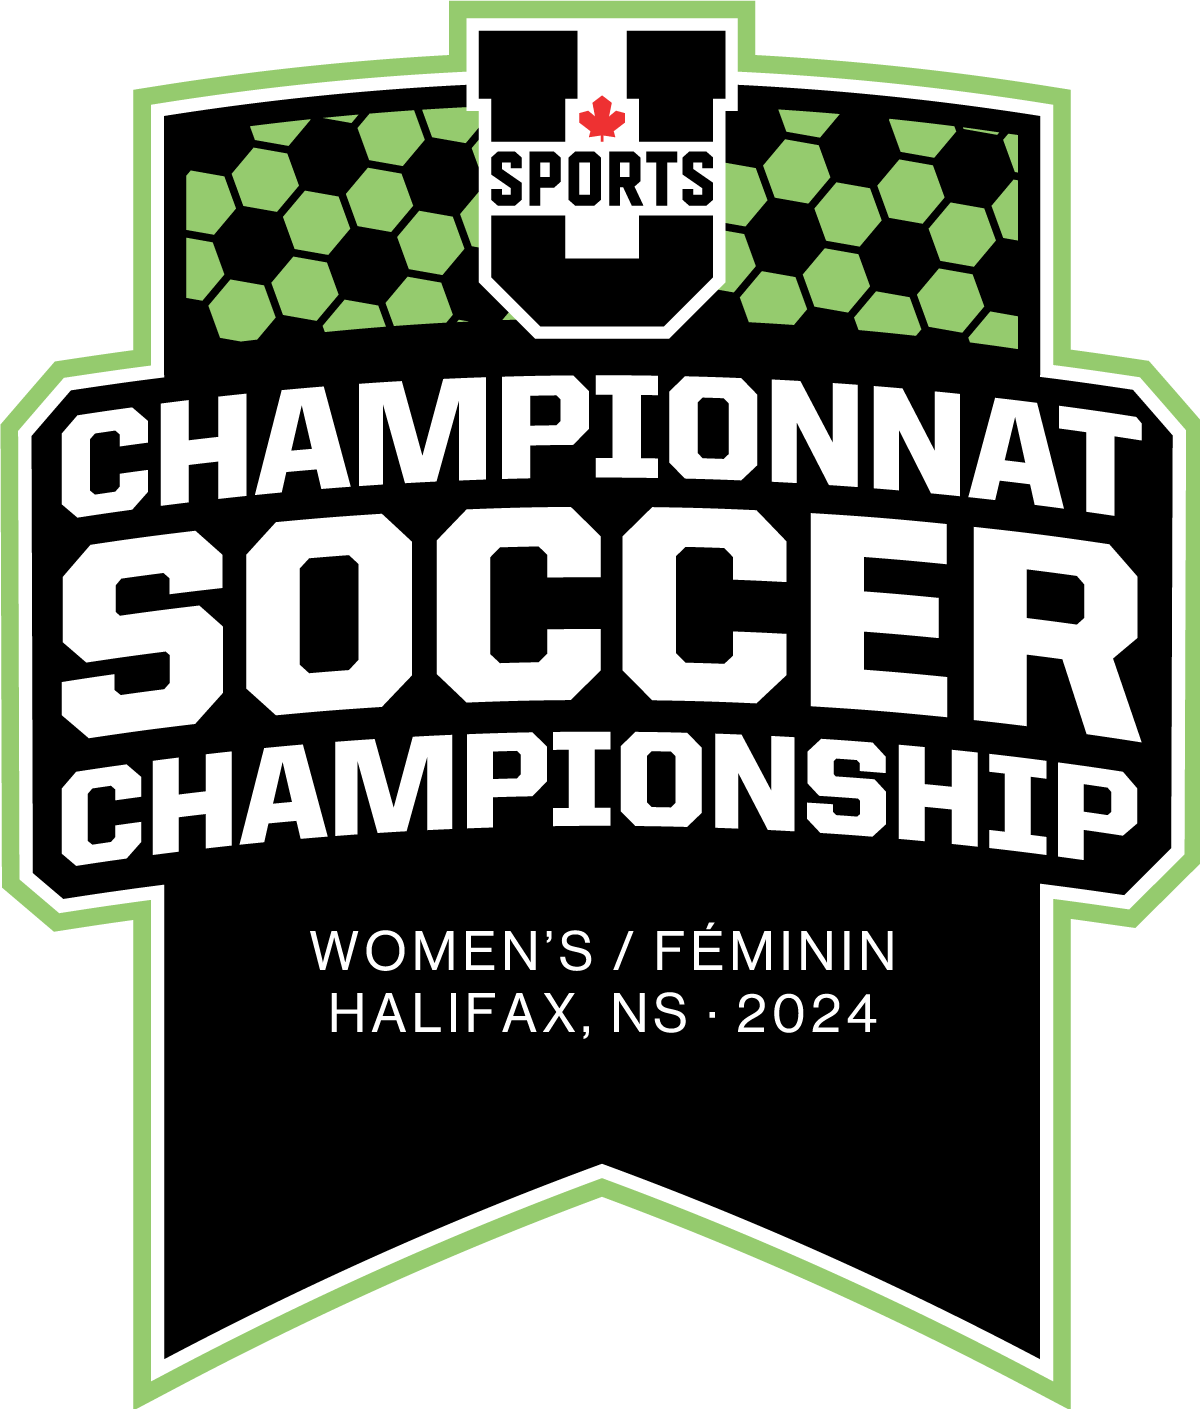 USports_Champ2425_SoccerW_Primary_CMYK_BL.png (84 KB)